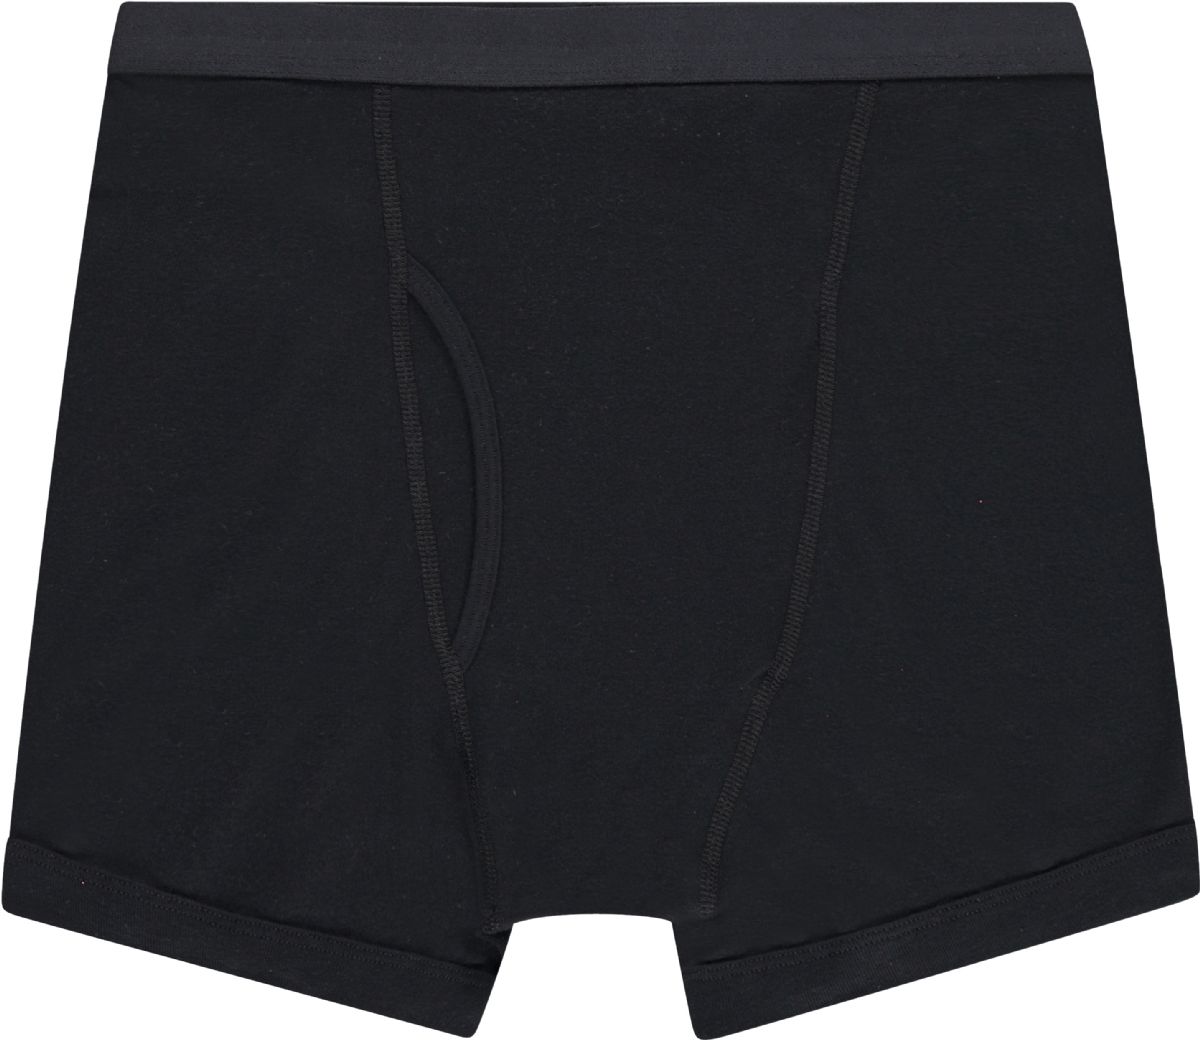 Gildan Mens Imperfect Briefs, Assorted Colors And Sizes - at